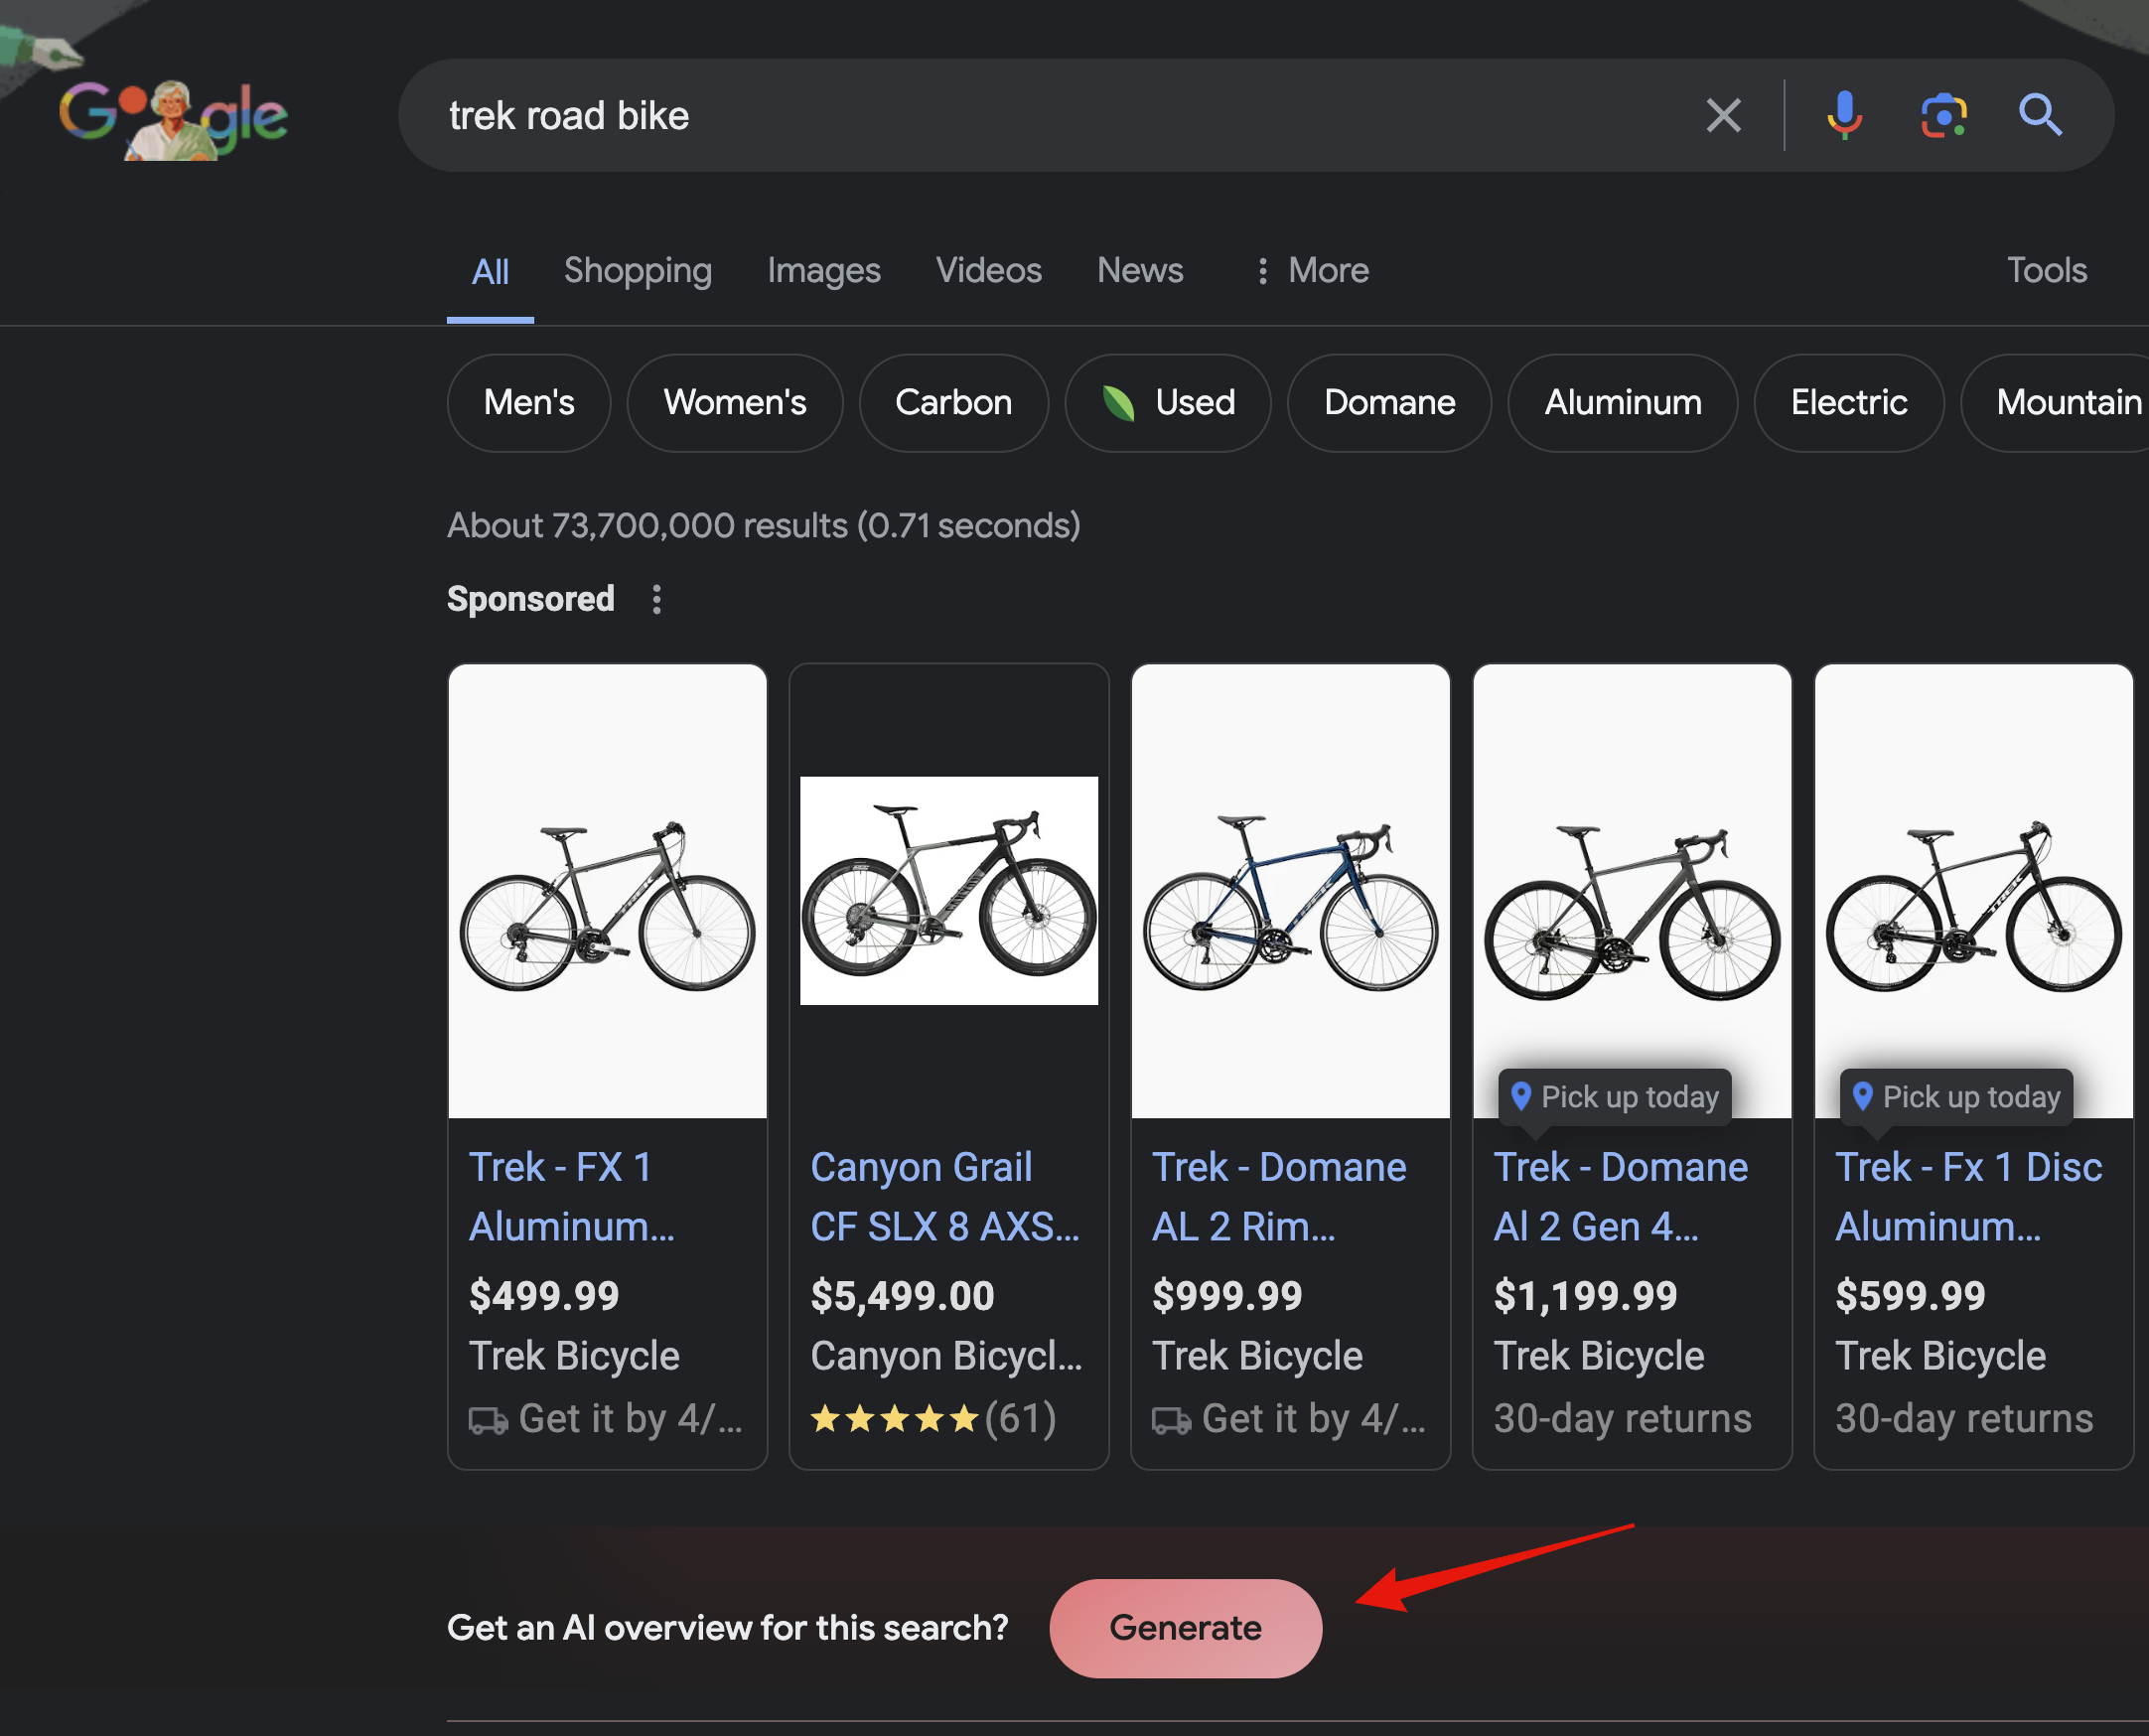 Screenshot of a Google SGE search results page for "trek bike," displaying various models of trek bicycles available for purchase, with price information and customer ratings. A red arrow points to the "generate